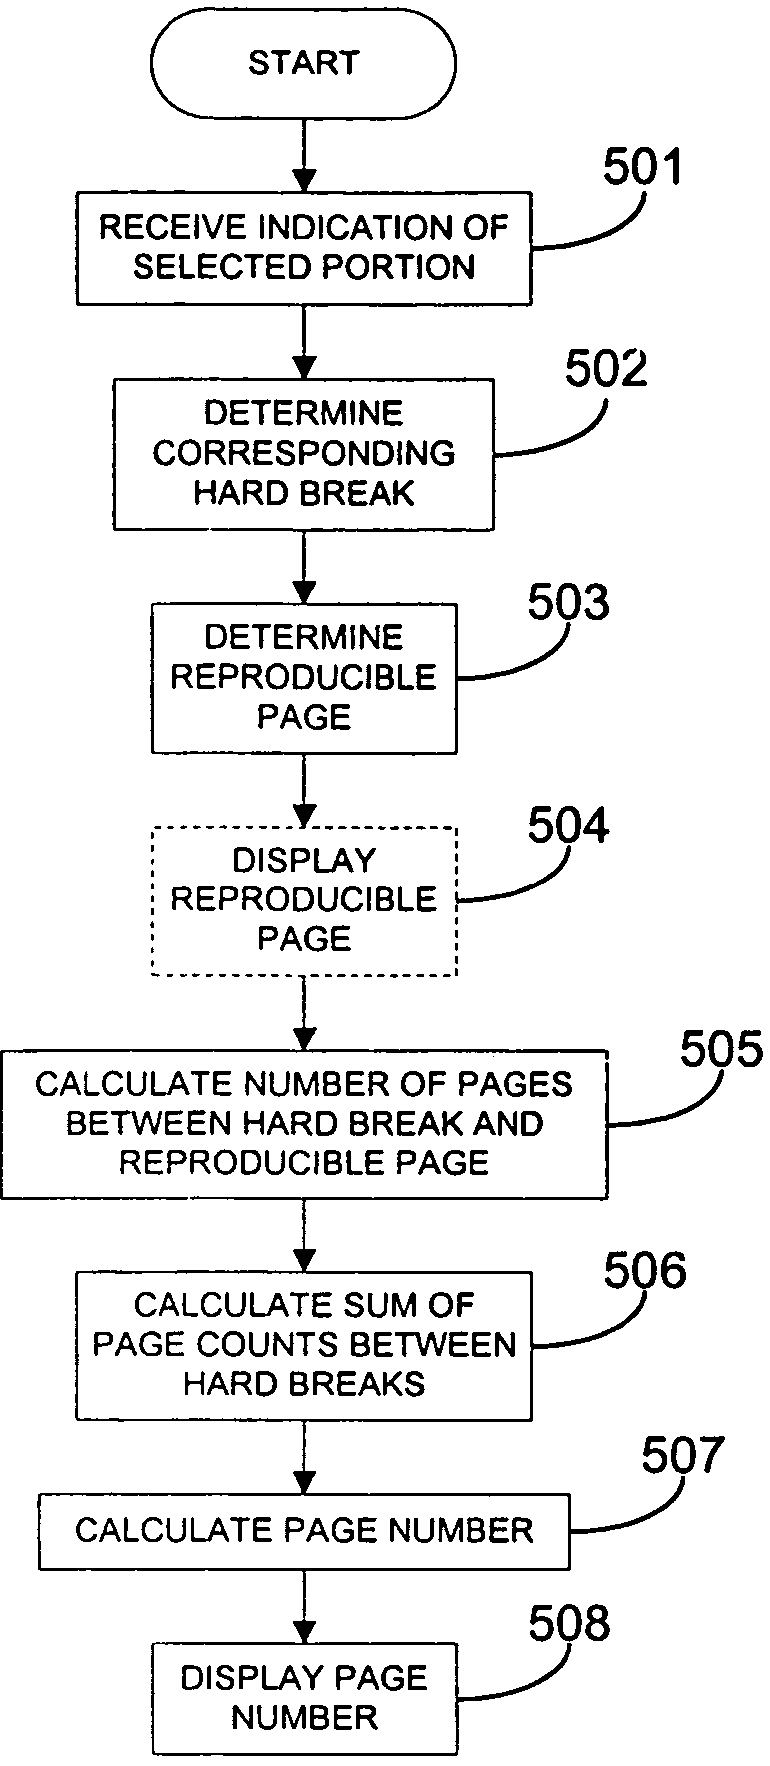 Document pagination based on hard breaks and active formatting tags